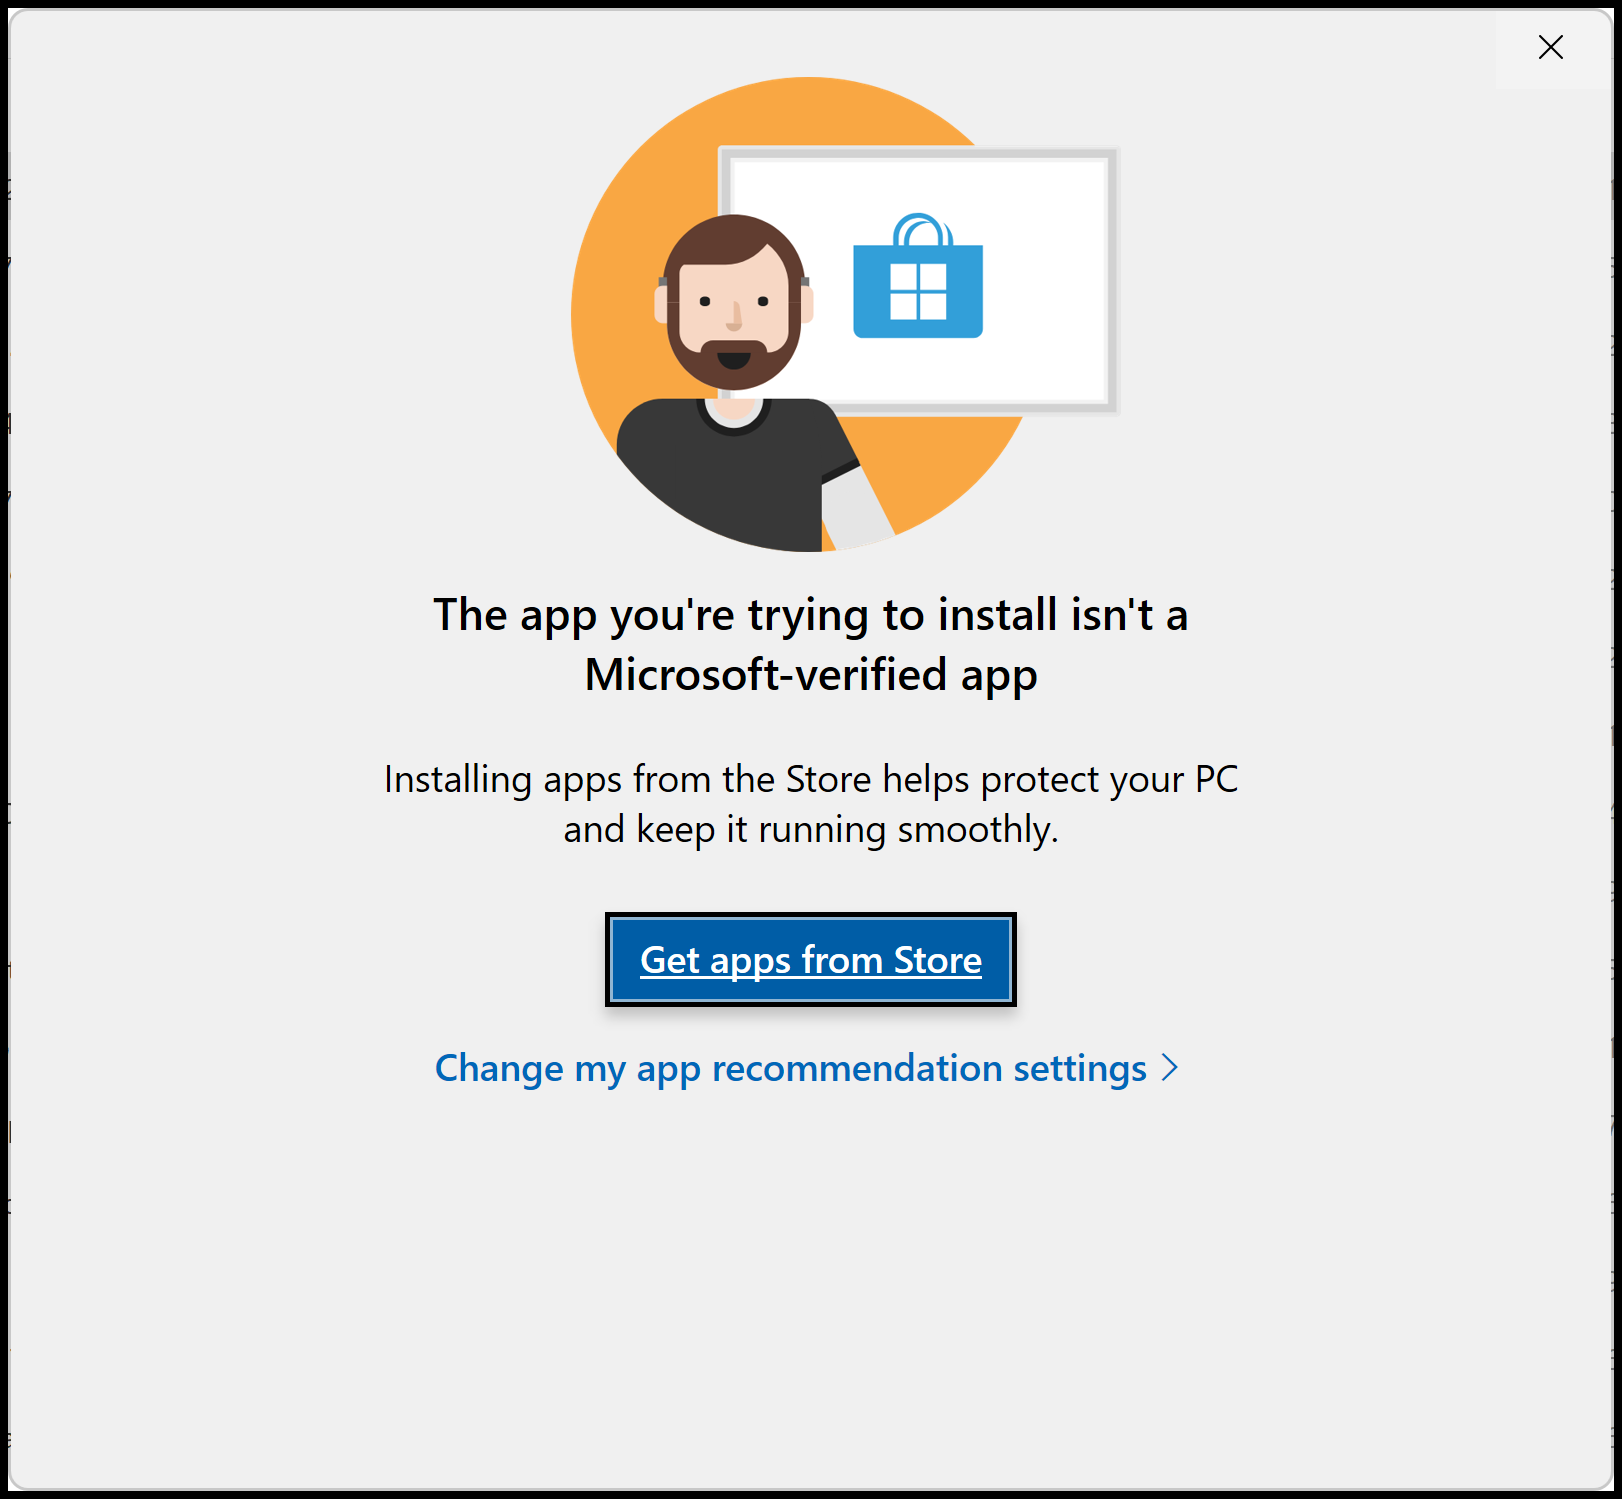 The app you're trying to install isn't a Microsoft-verified app